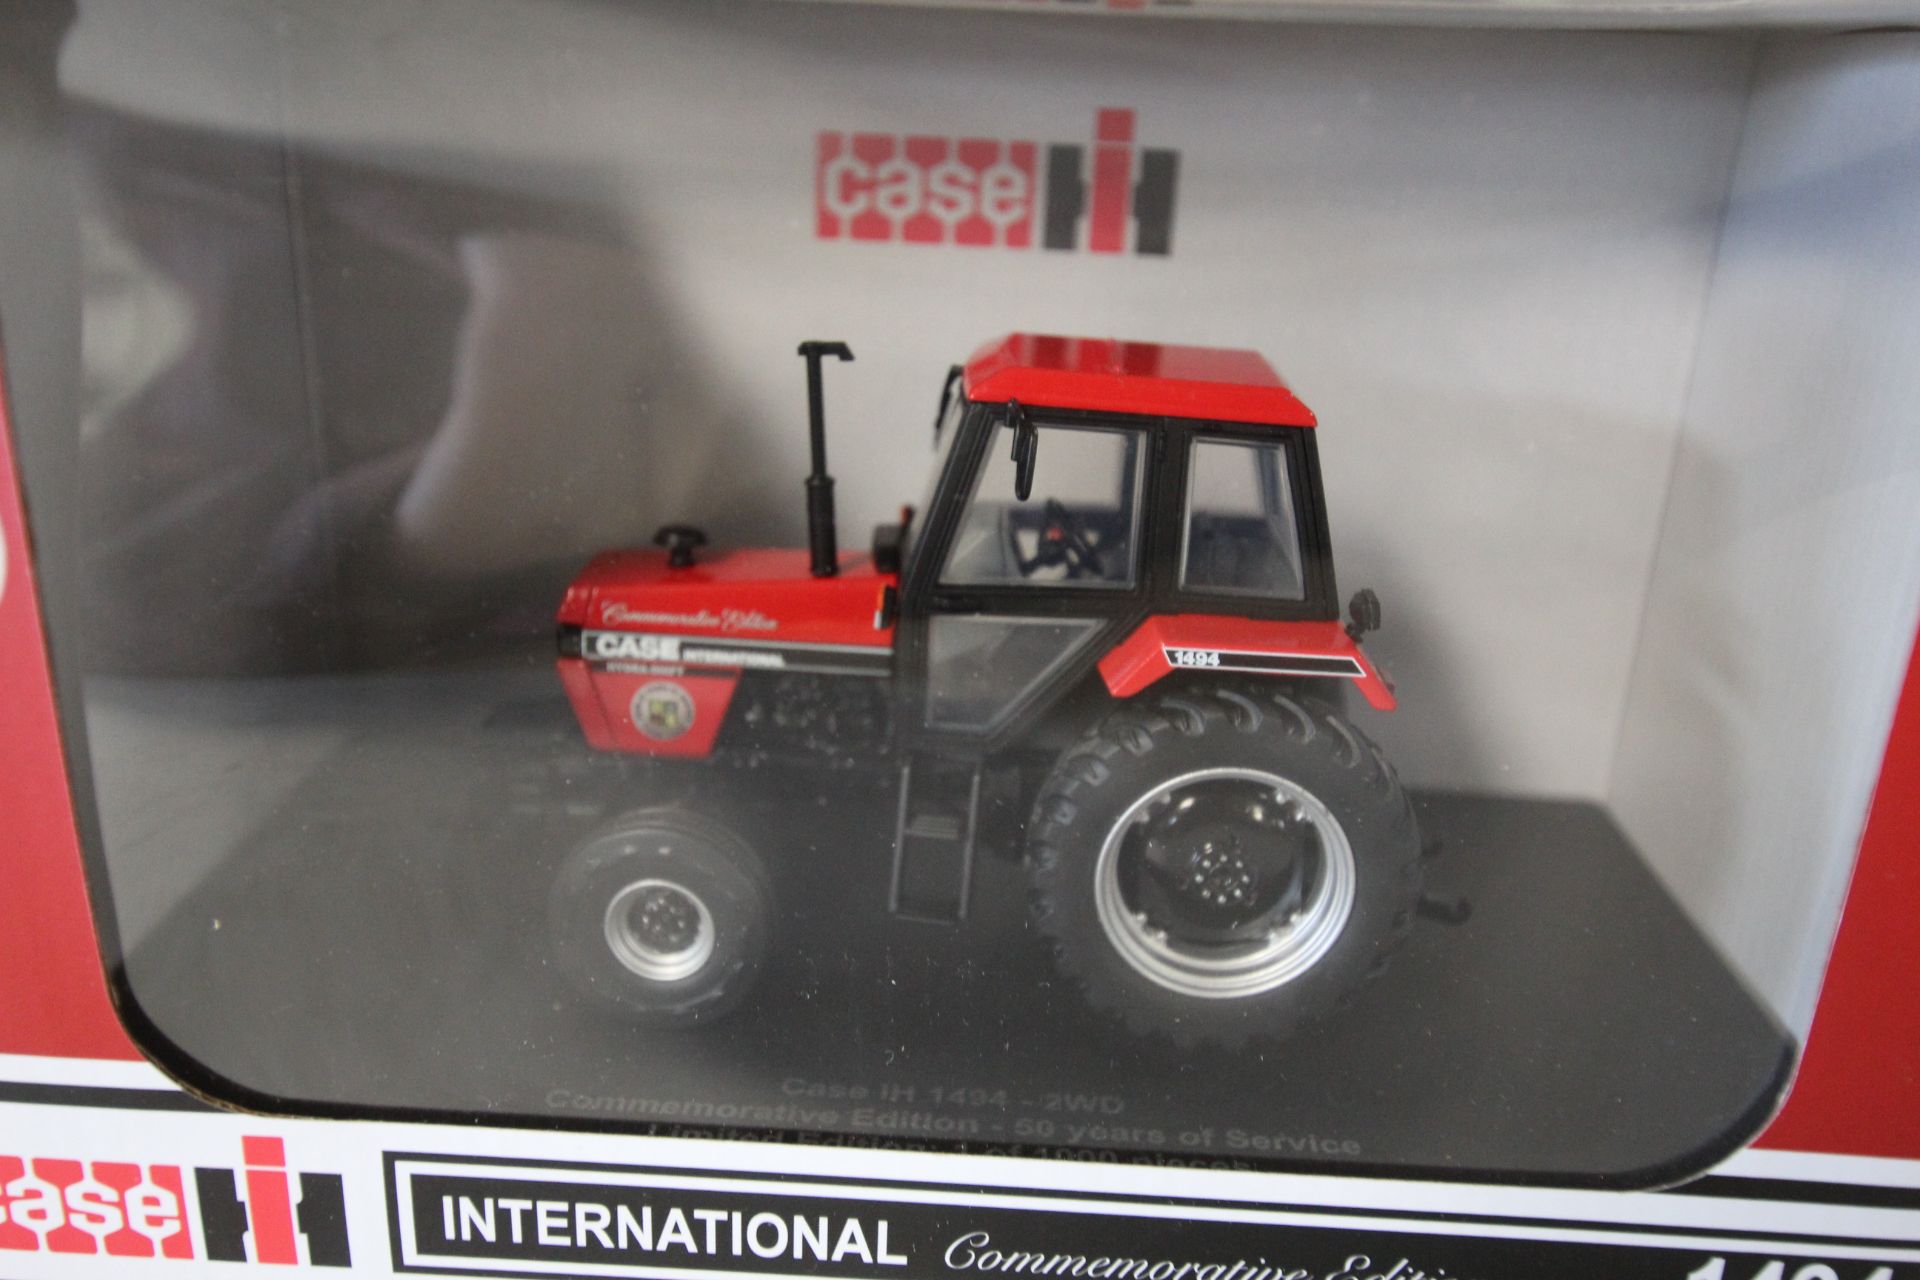 UH Case/IH 1494 2wd Tractor - Commemorative Limited Edition Scale. V - Image 2 of 2